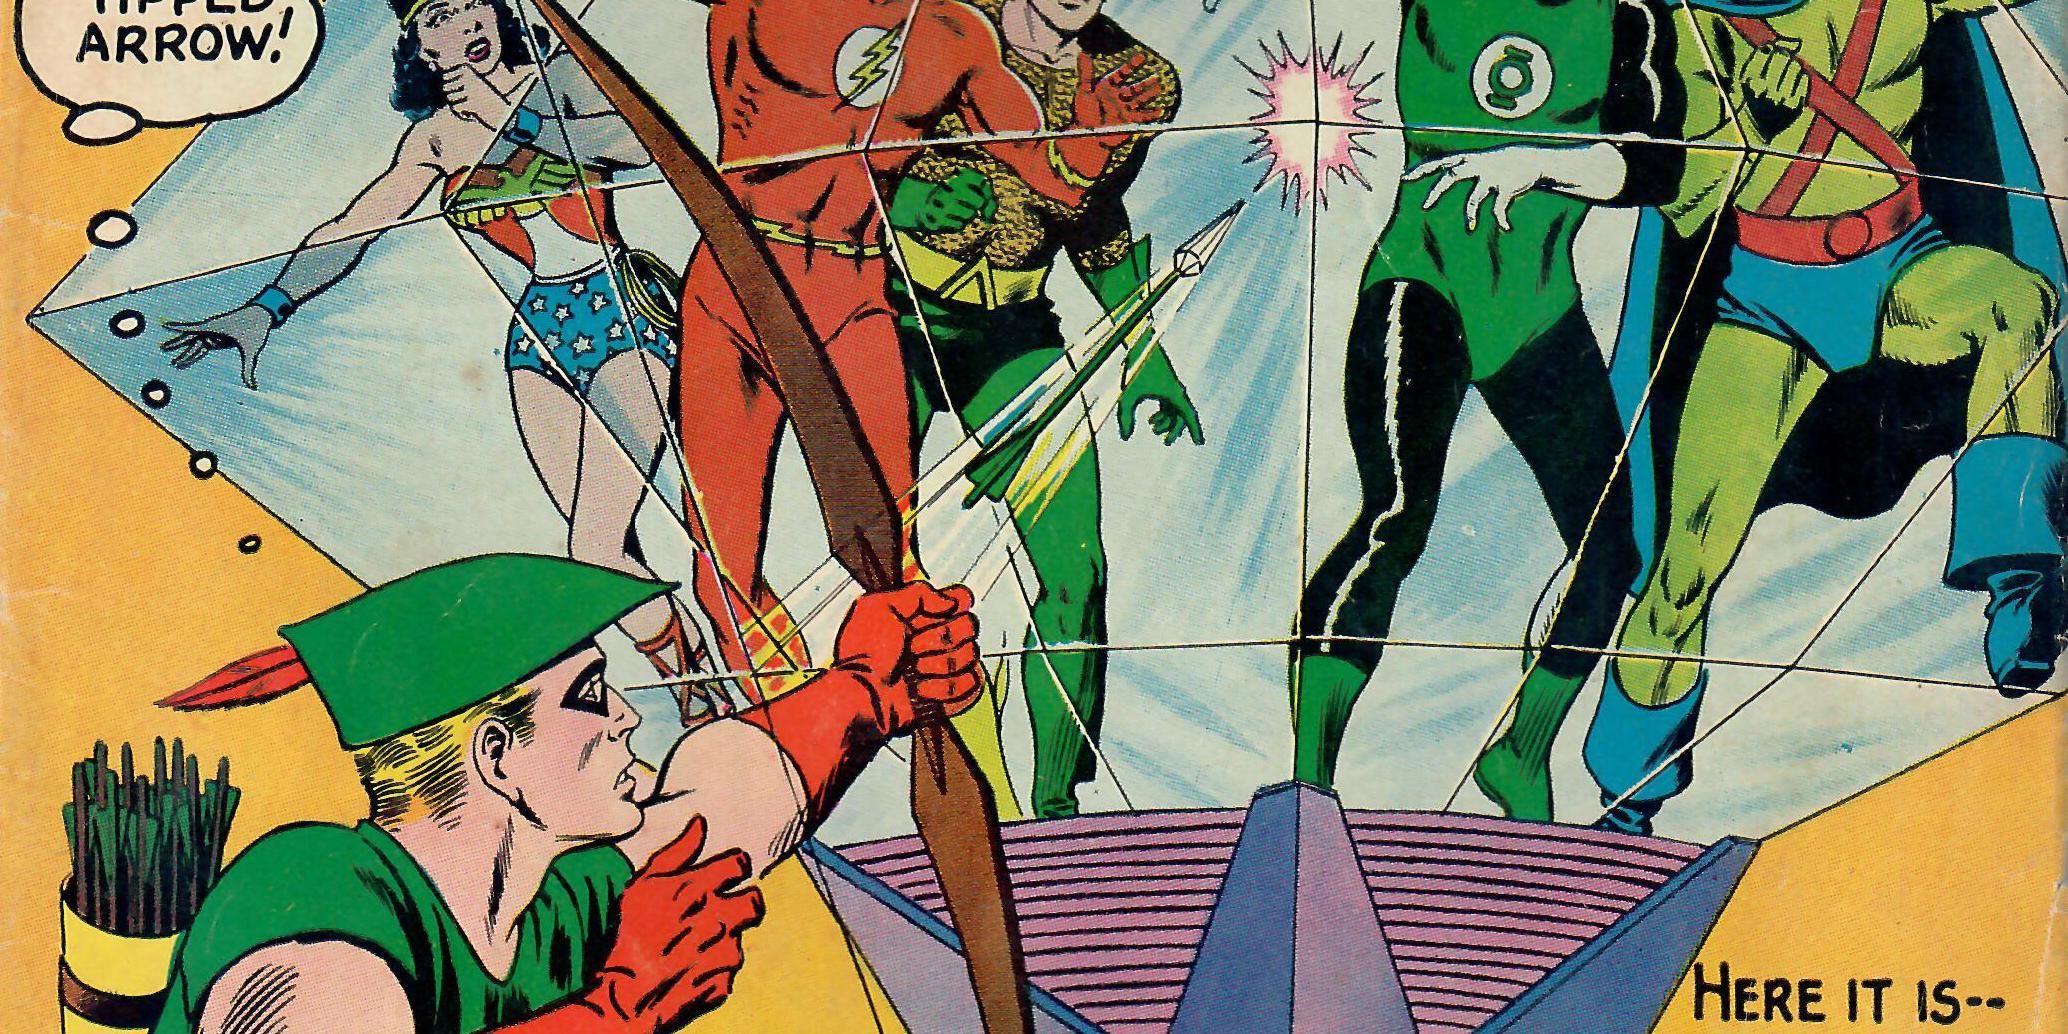 Green Arrow saves the Justice League, by Mike Sekowsky and Murphy Anderson